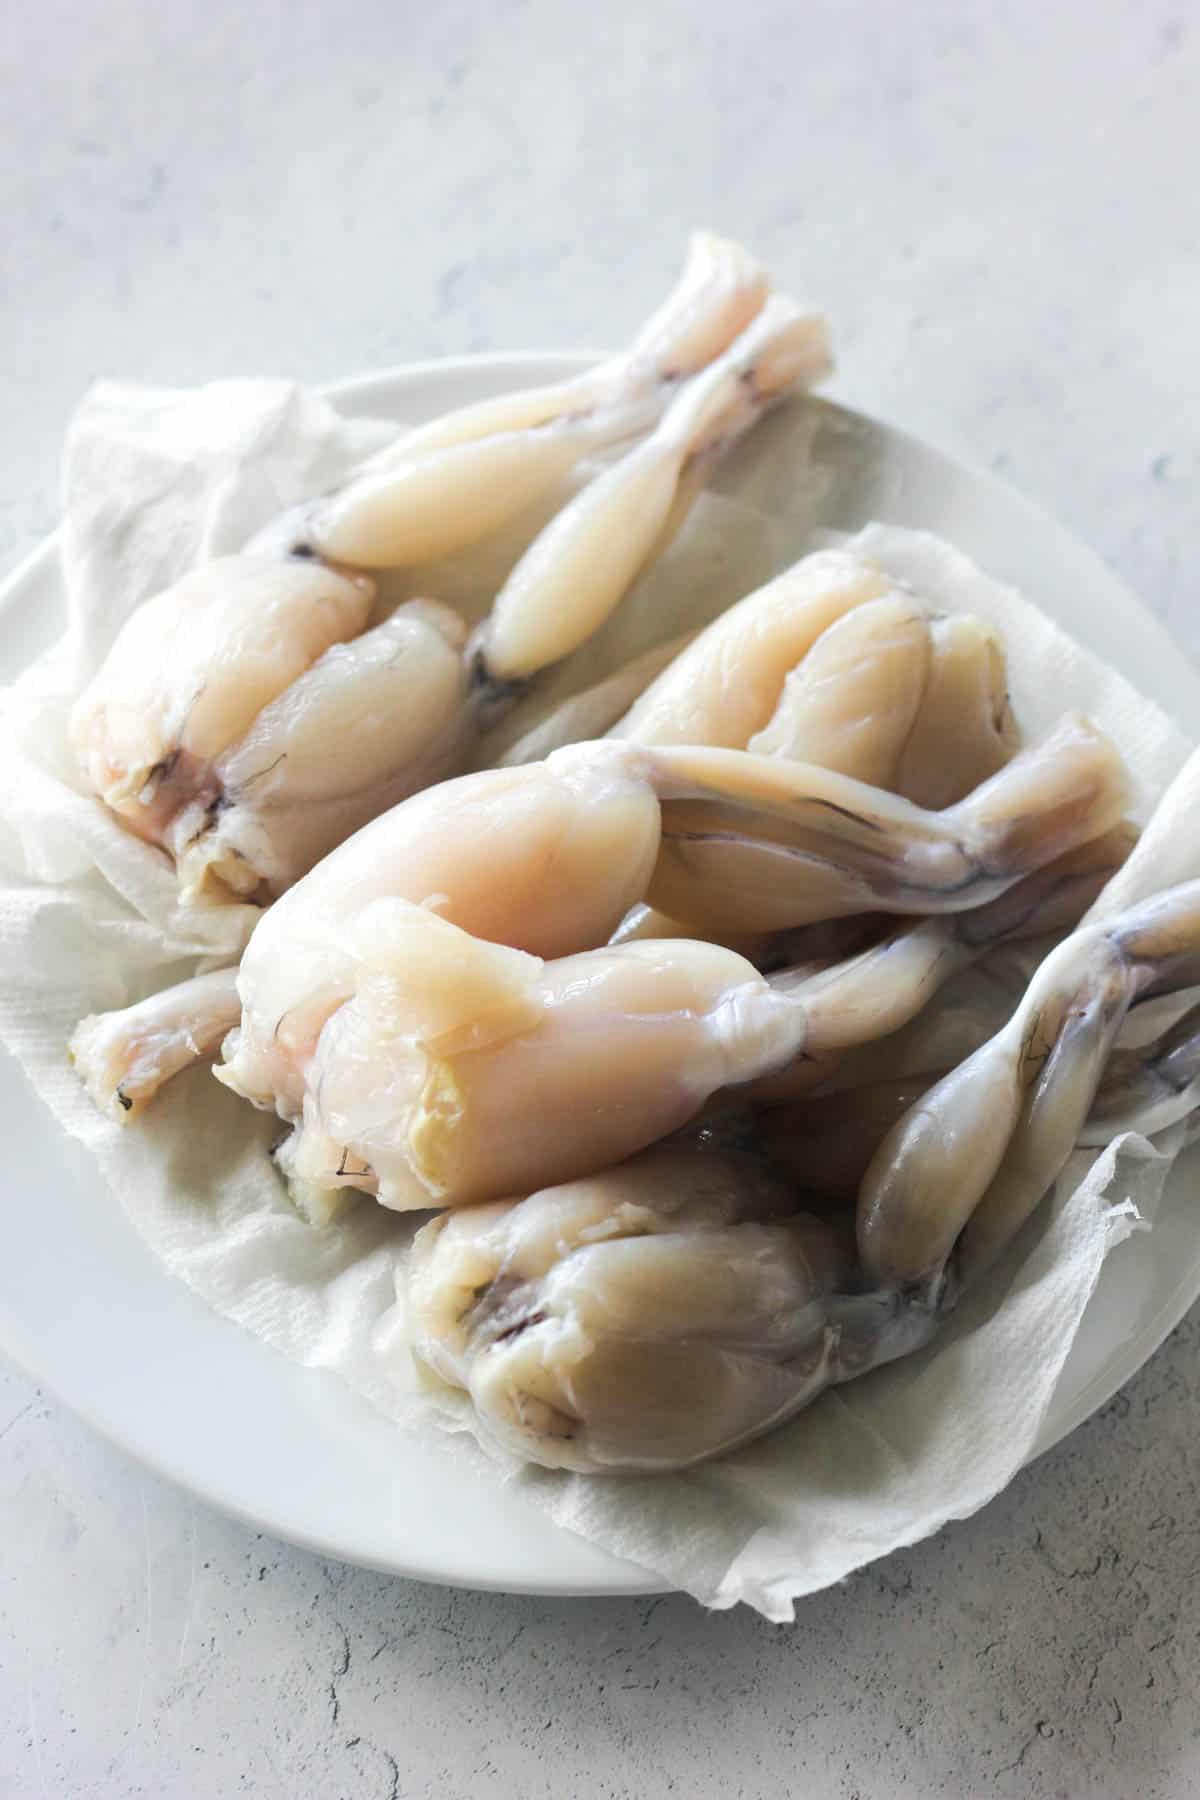 raw frog legs on the plate